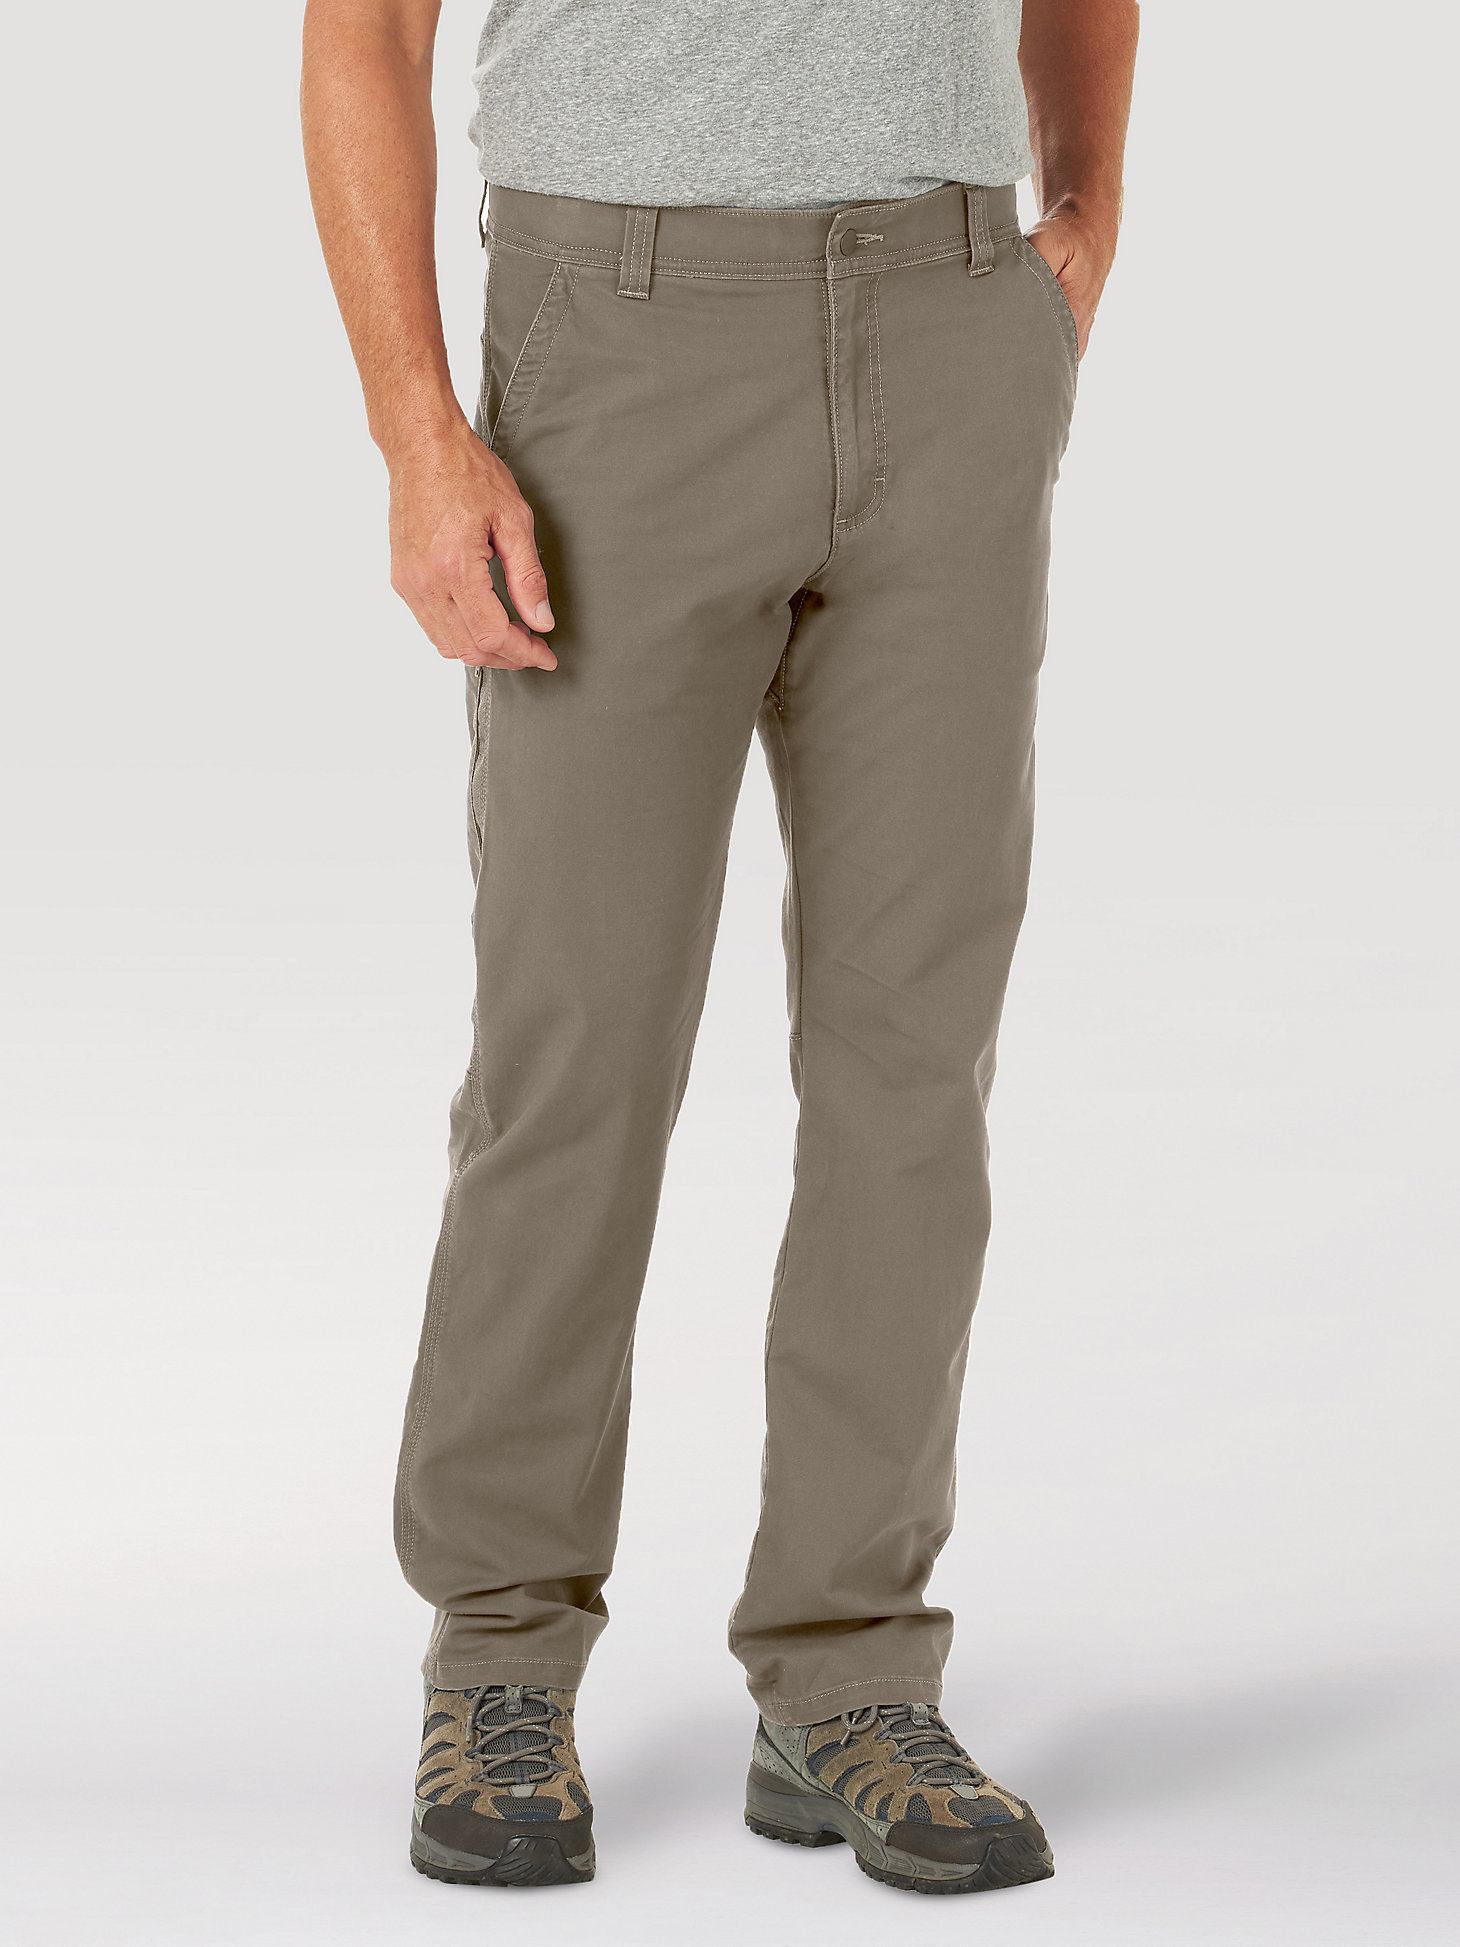 Men's Wrangler® Outdoor Rugged Utility Pant in Brindle main view